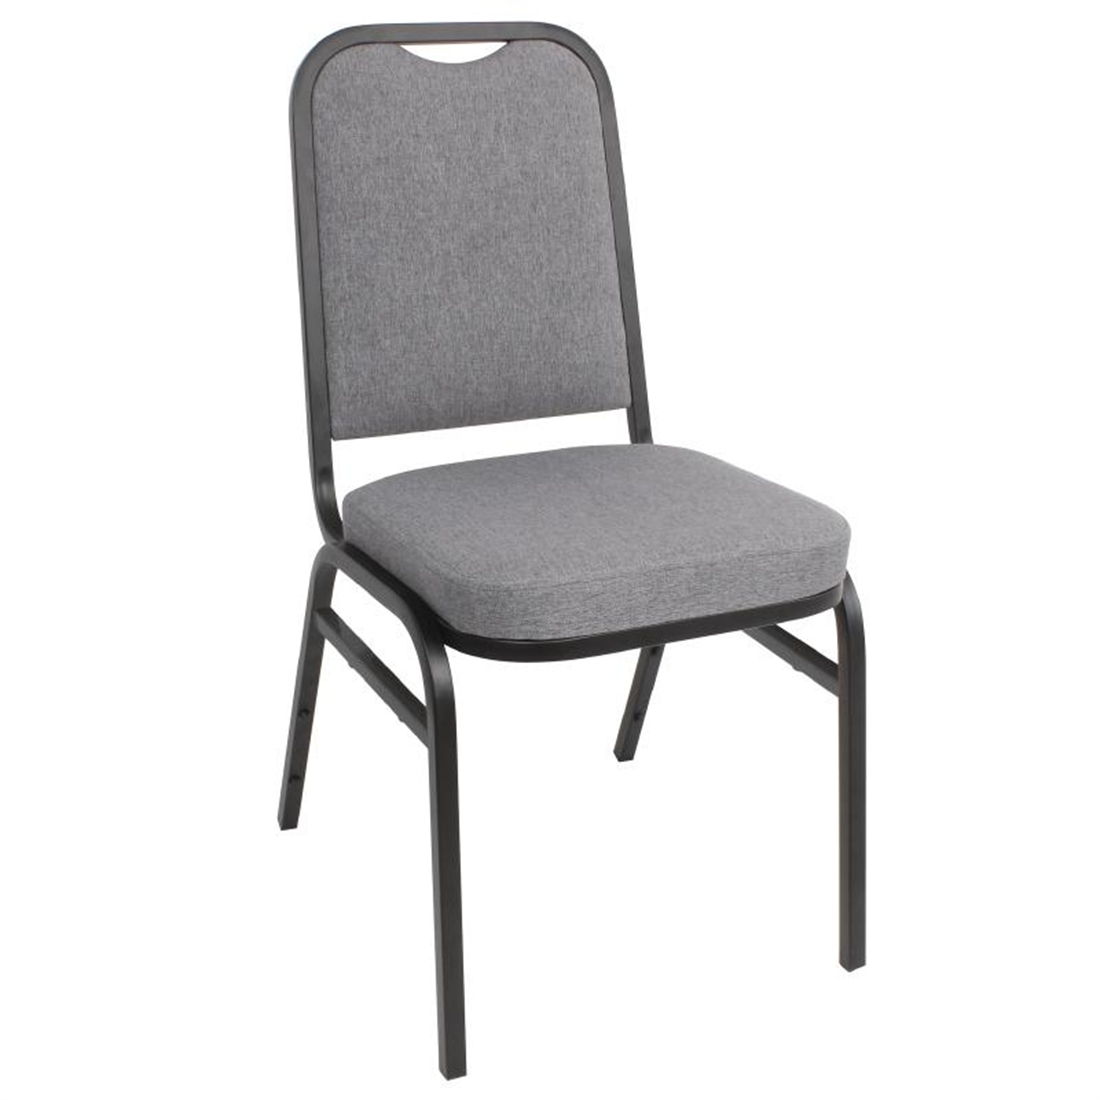 Bolero Steel Banqueting Chair Square Back with Grey Plain Cloth Pack 4